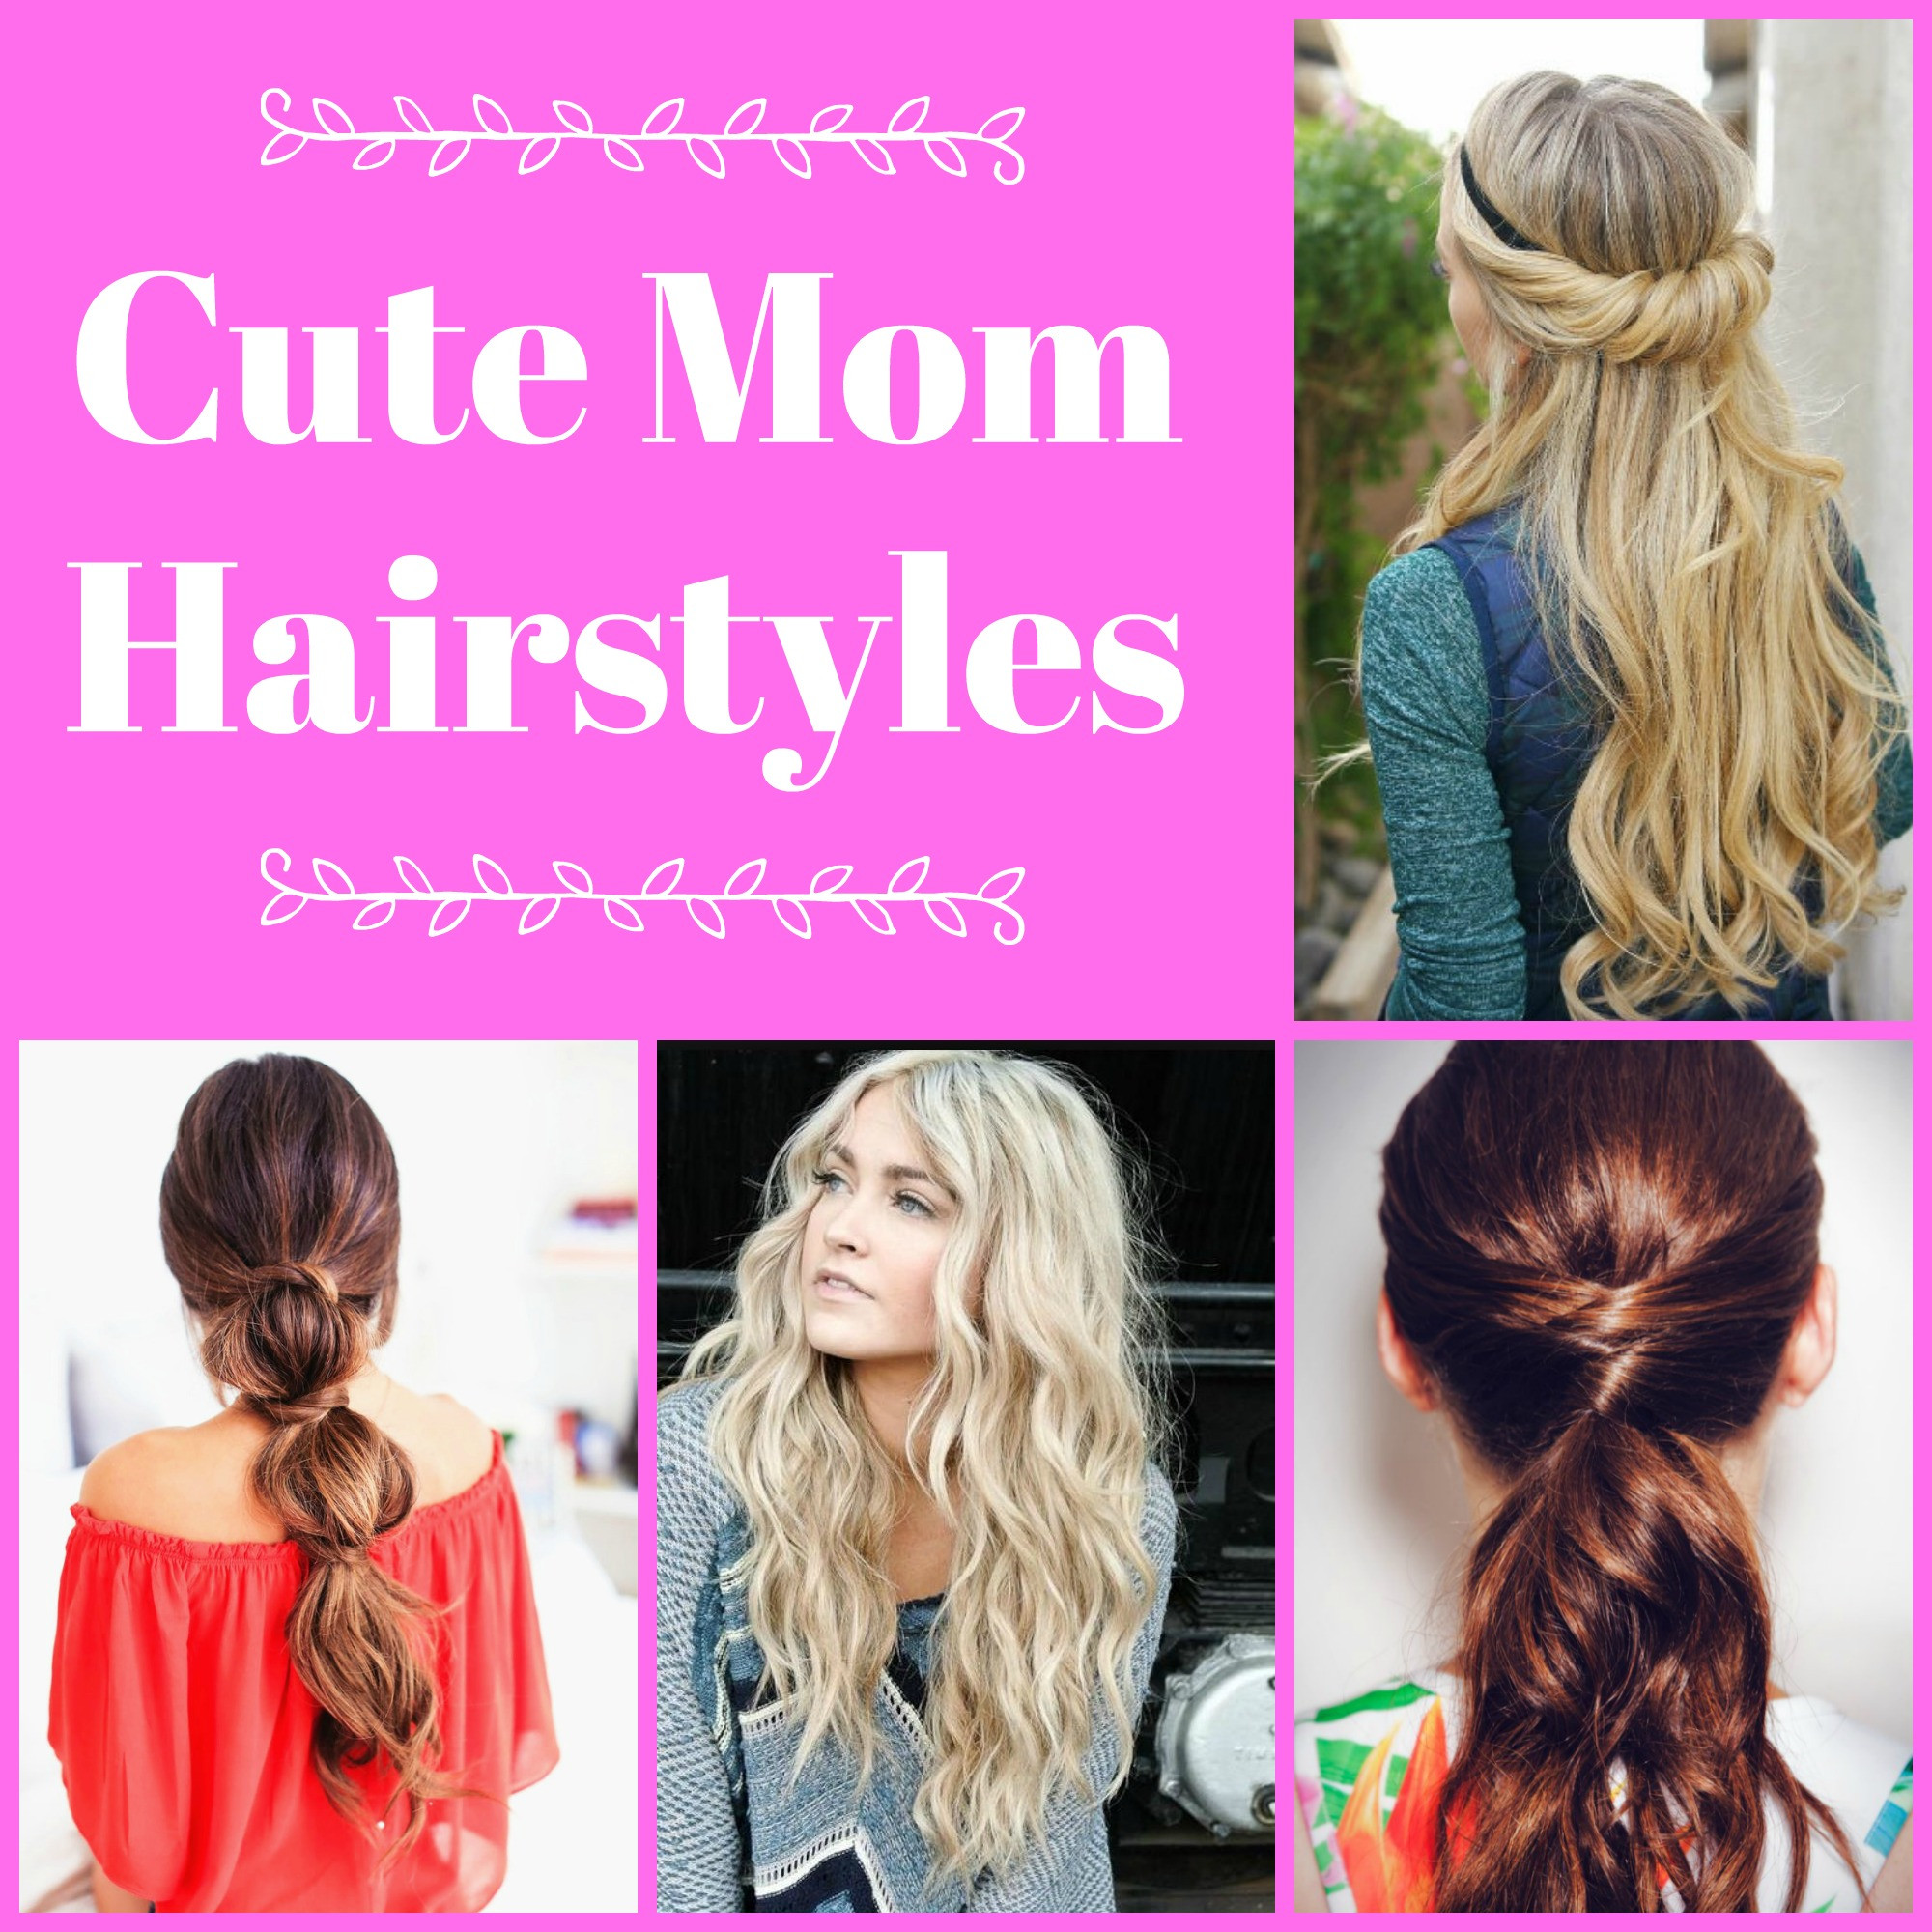 Cute Mom Hairstyles
 Cute Mom Hairstyles – A Nation of Moms